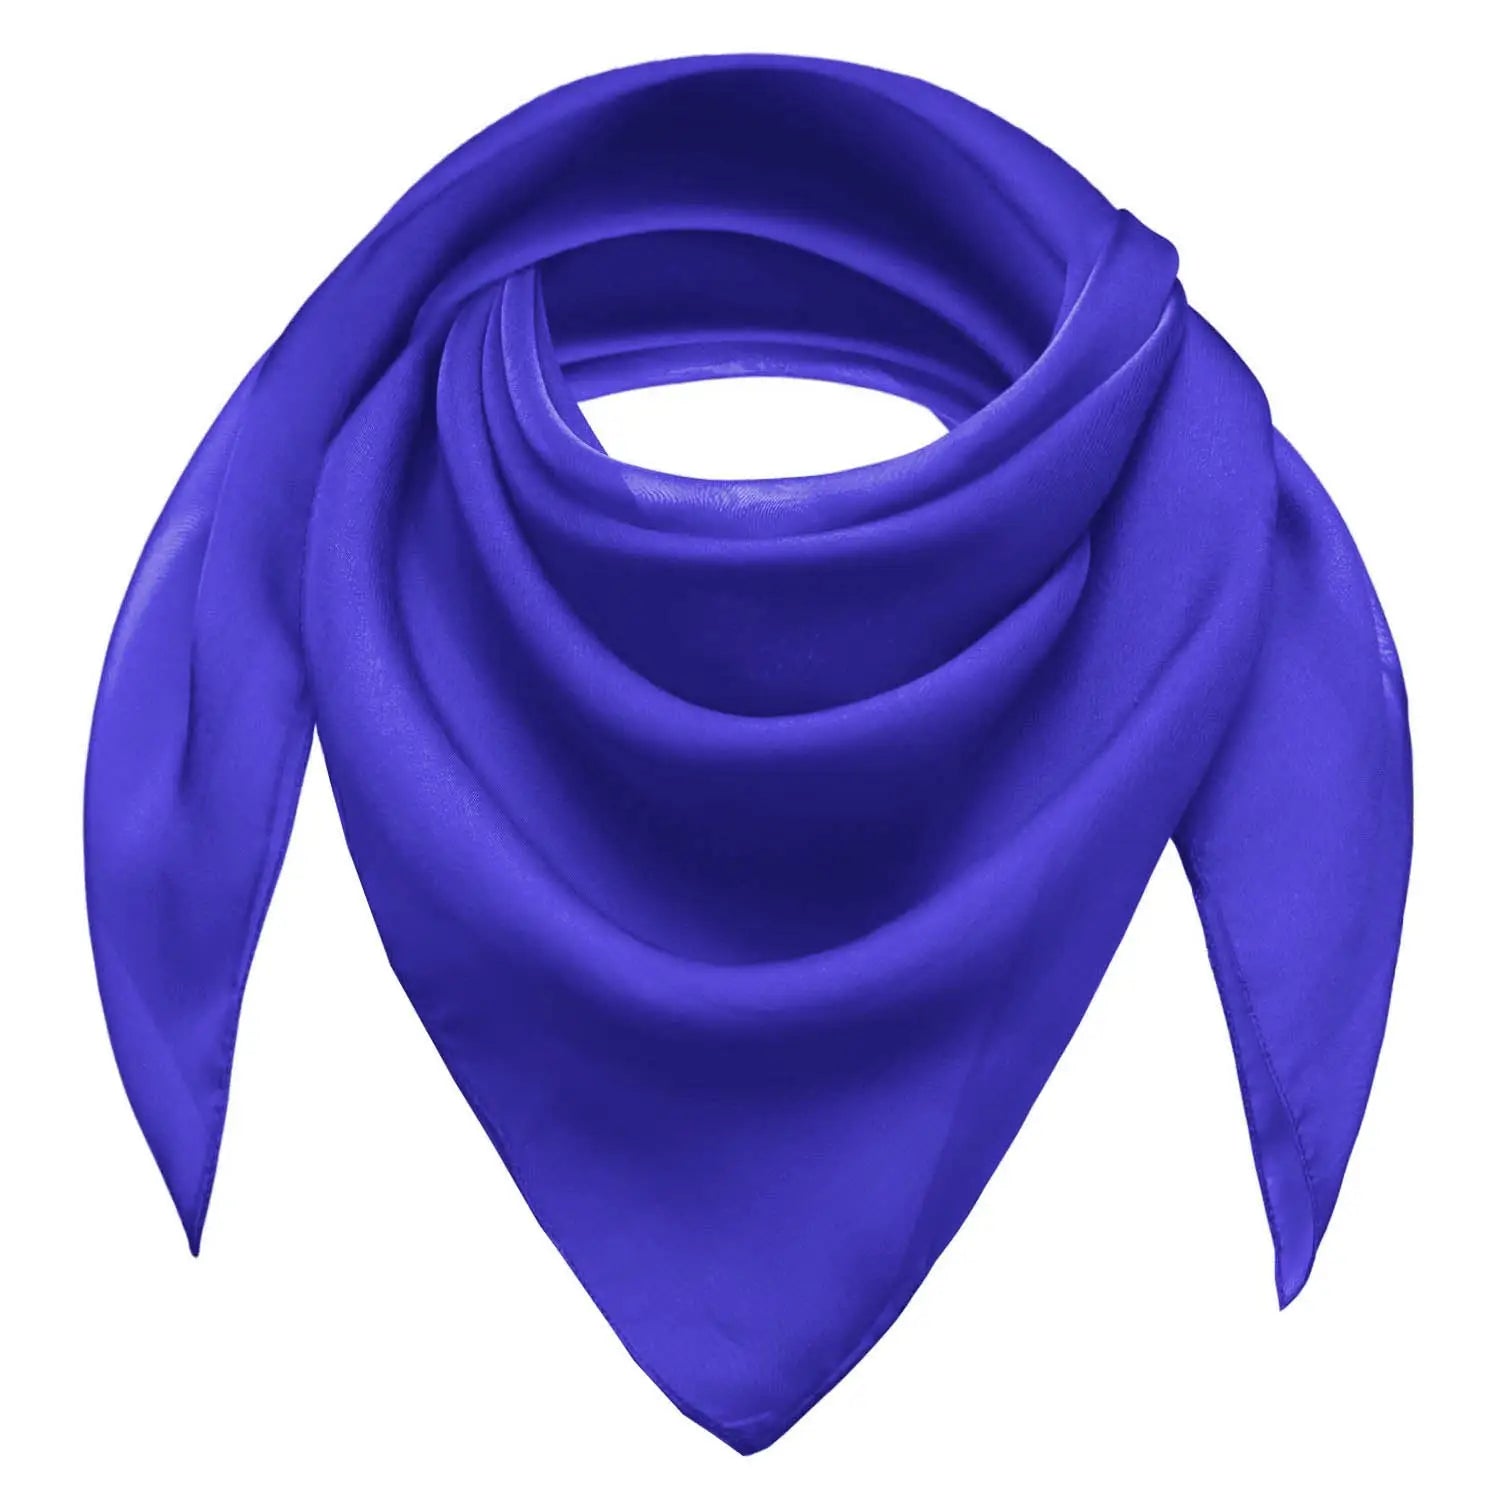 Chiffon square scarf in blue on white background